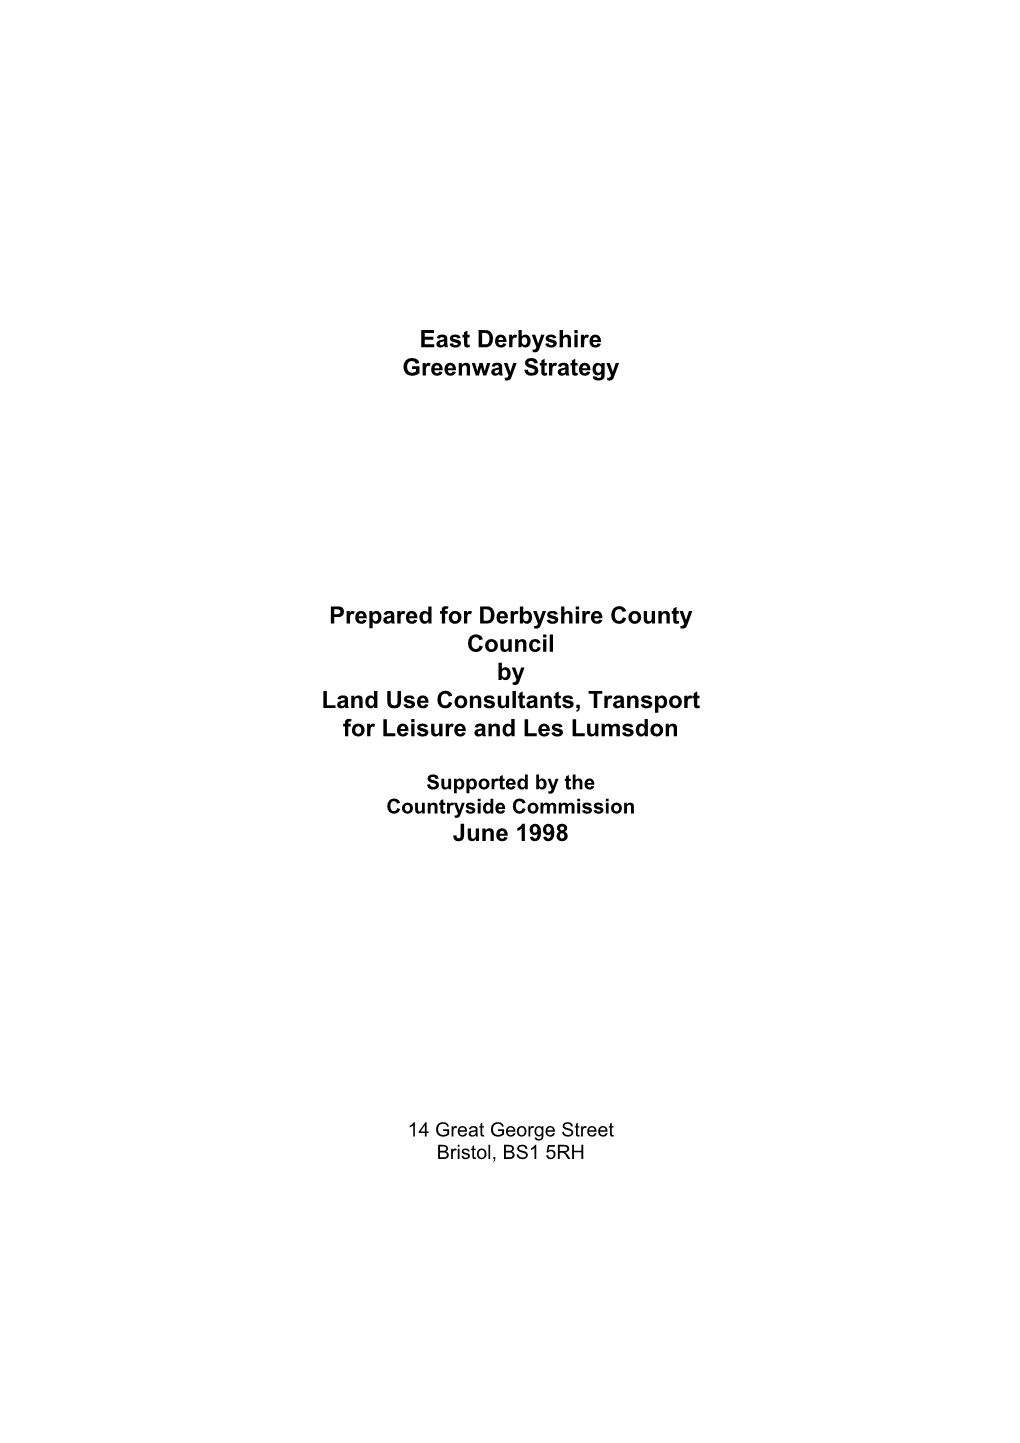 East Derbyshire Greenway Strategy